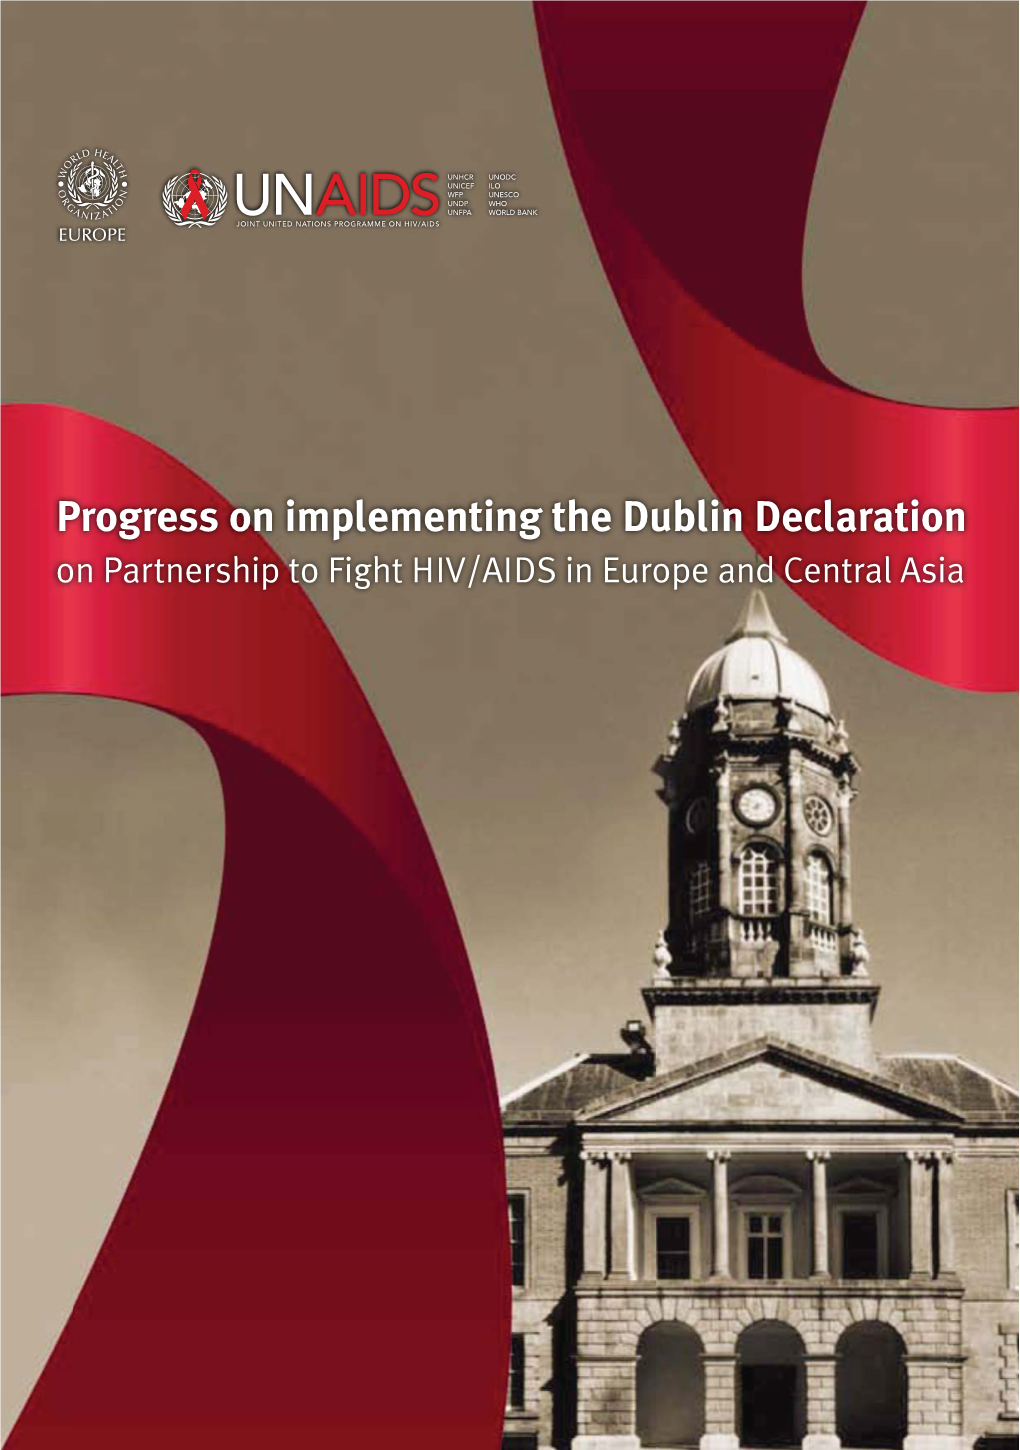 Dublin Declaration on HIV/AIDS in Prisons in Europe and Central Asia 24 February 2004